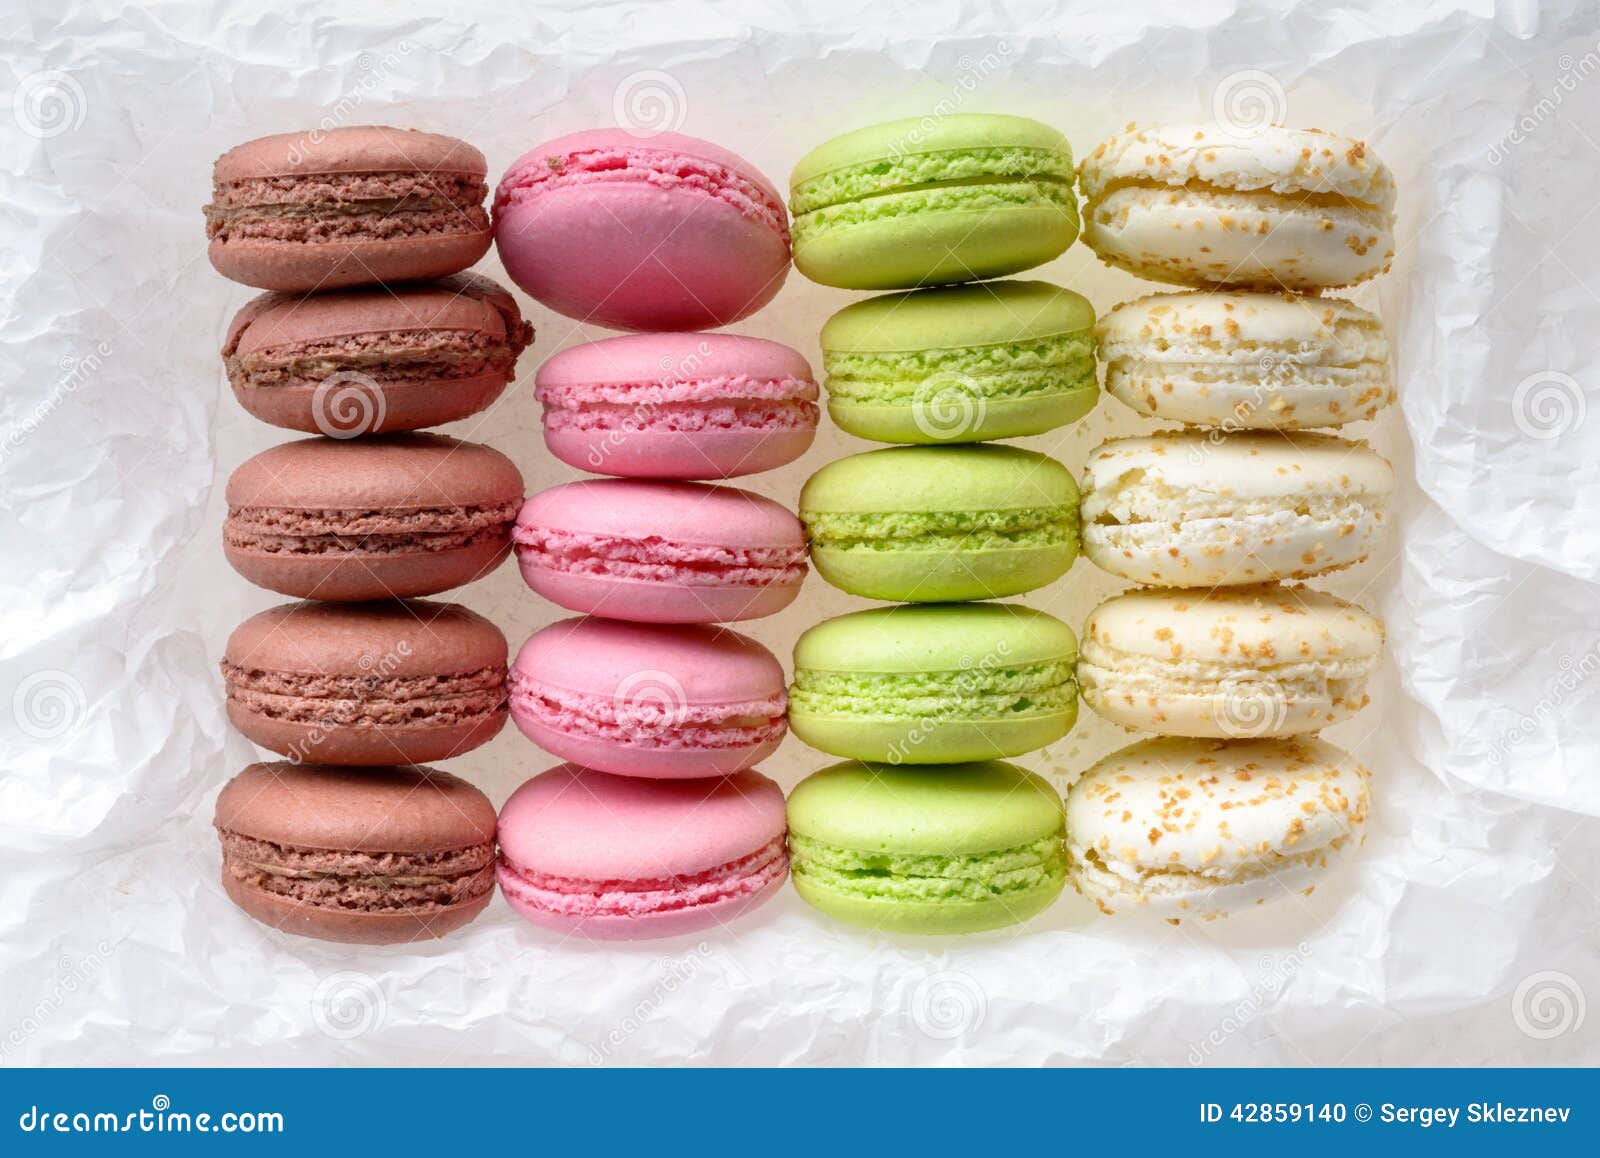 Multicolored macarons stock photo. Image of cake, assorted - 42859140